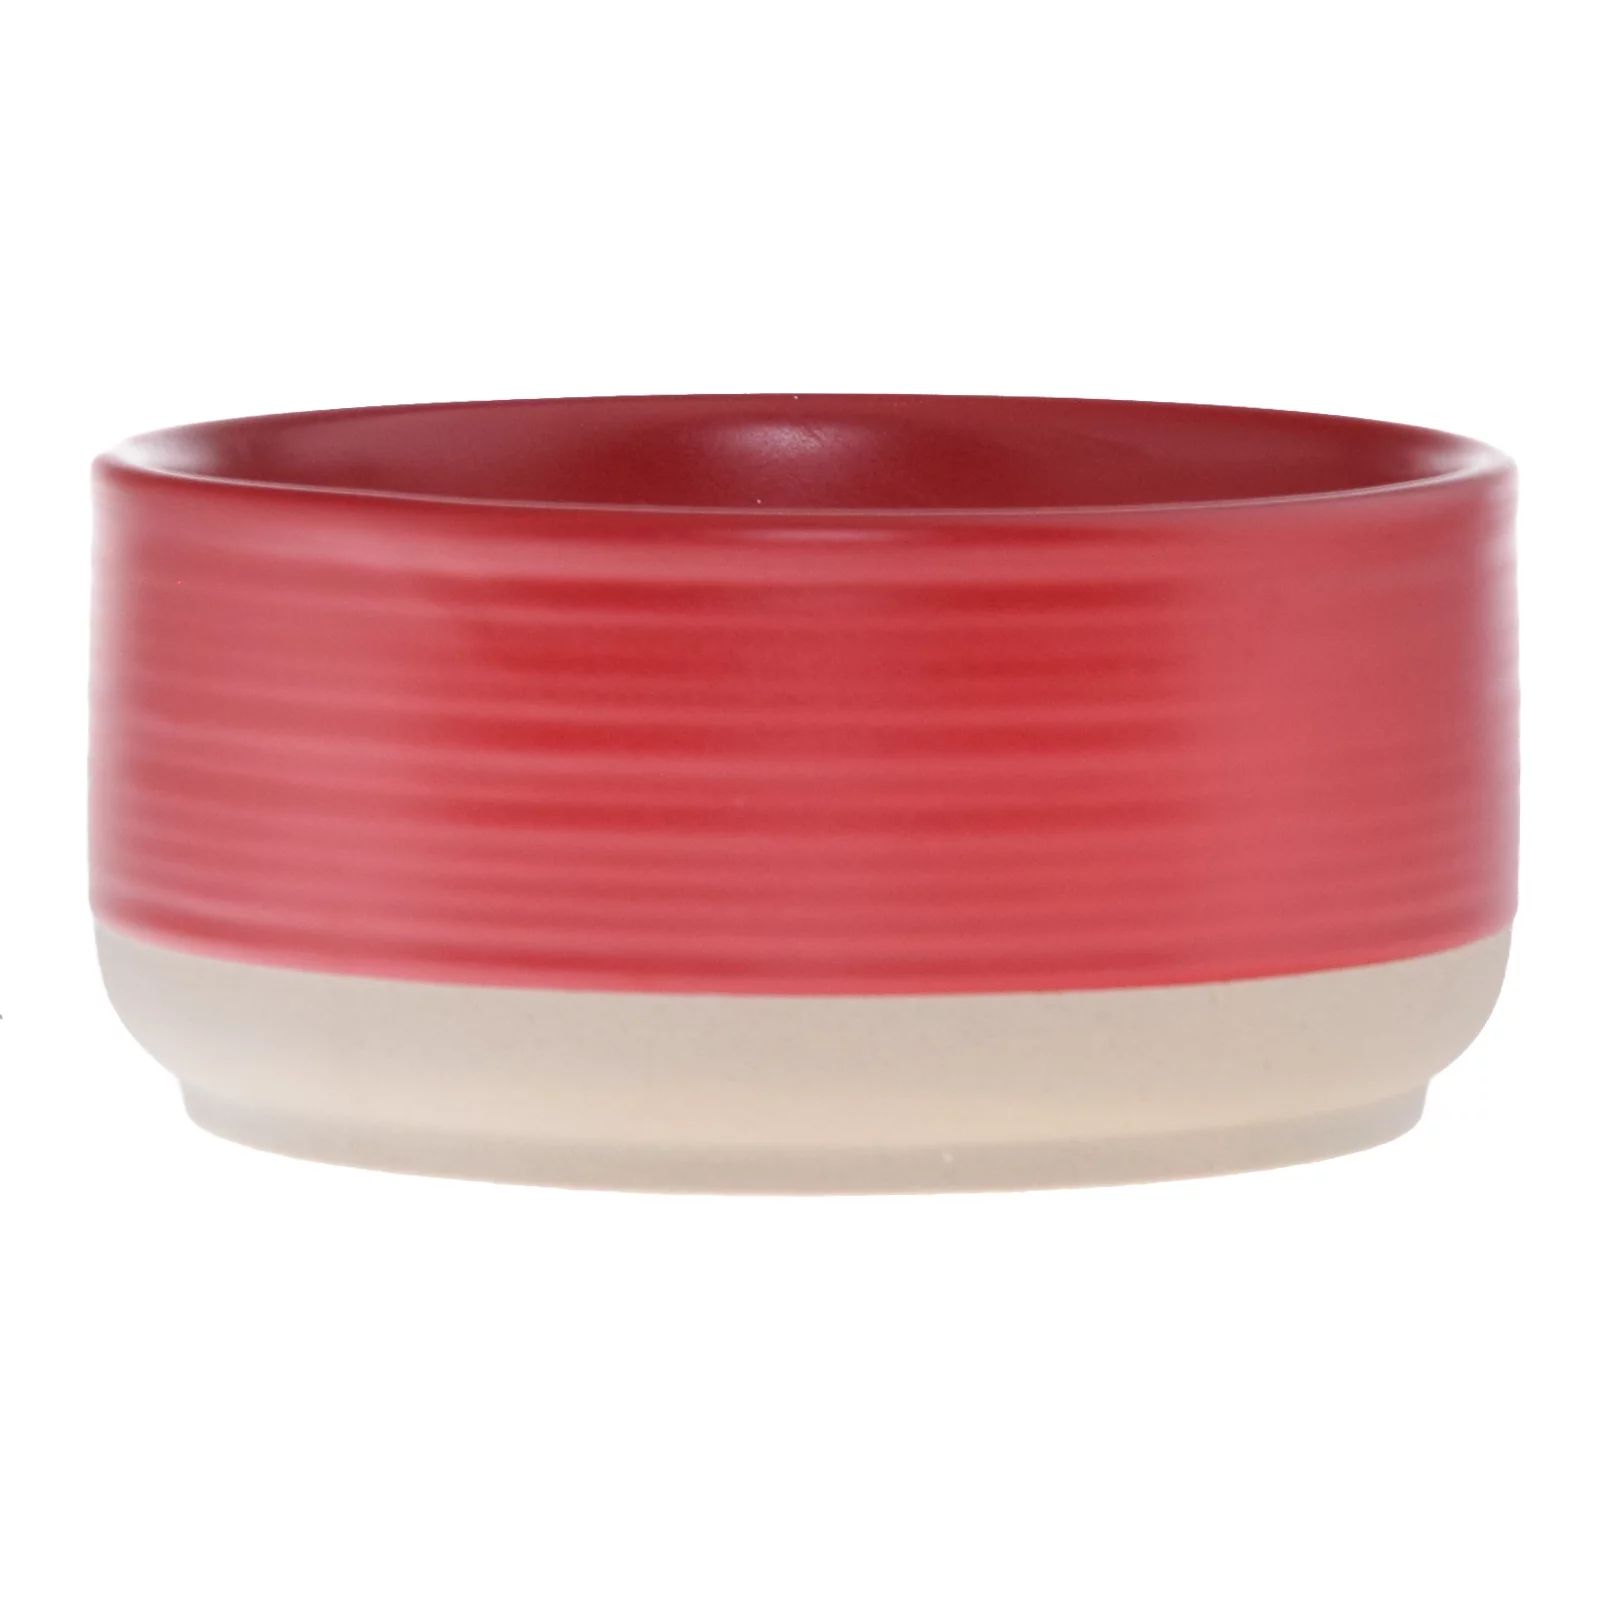 Better Homes & Gardens Red Lava Citrus Scented 16oz Ceramic Dish 3-Wick Candle | Walmart (US)